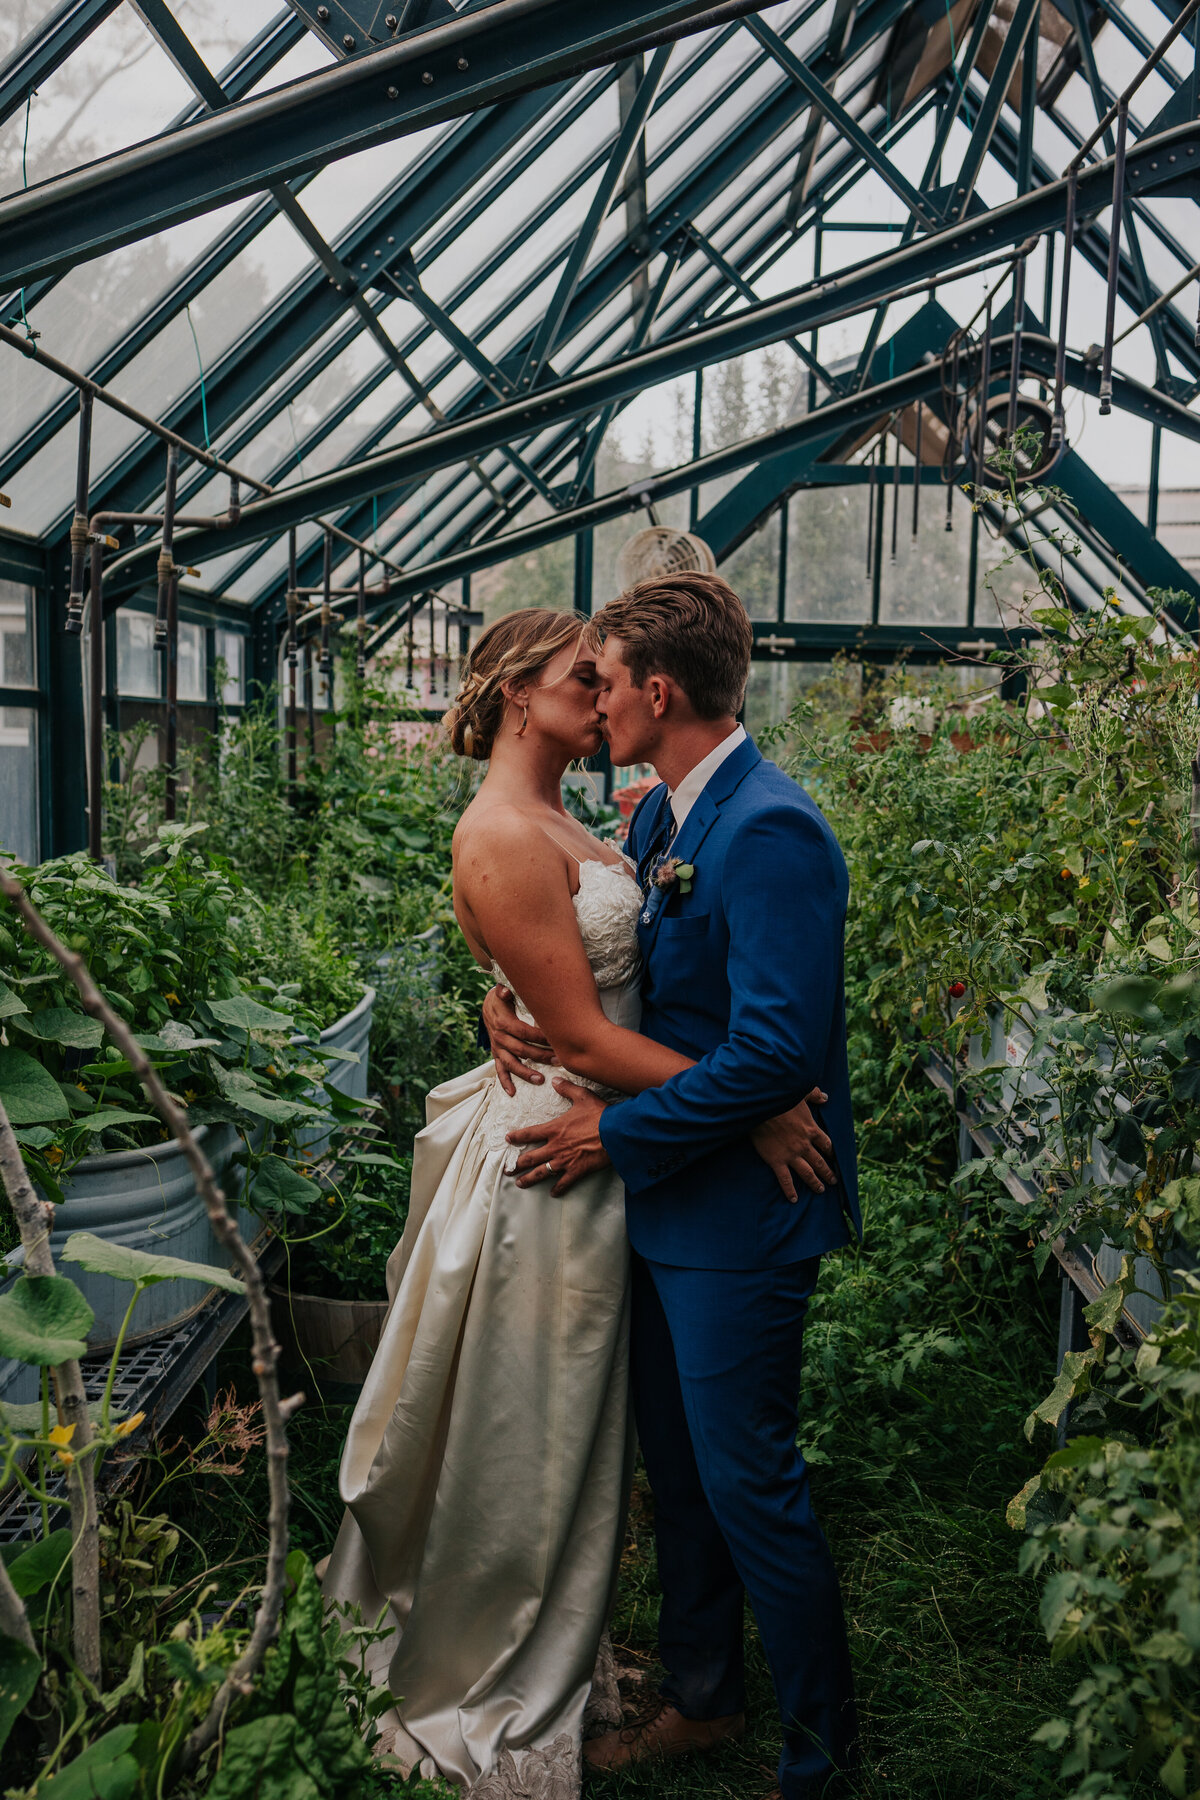 Bride and groom kiss each other in the middle of full grown greenhouse.